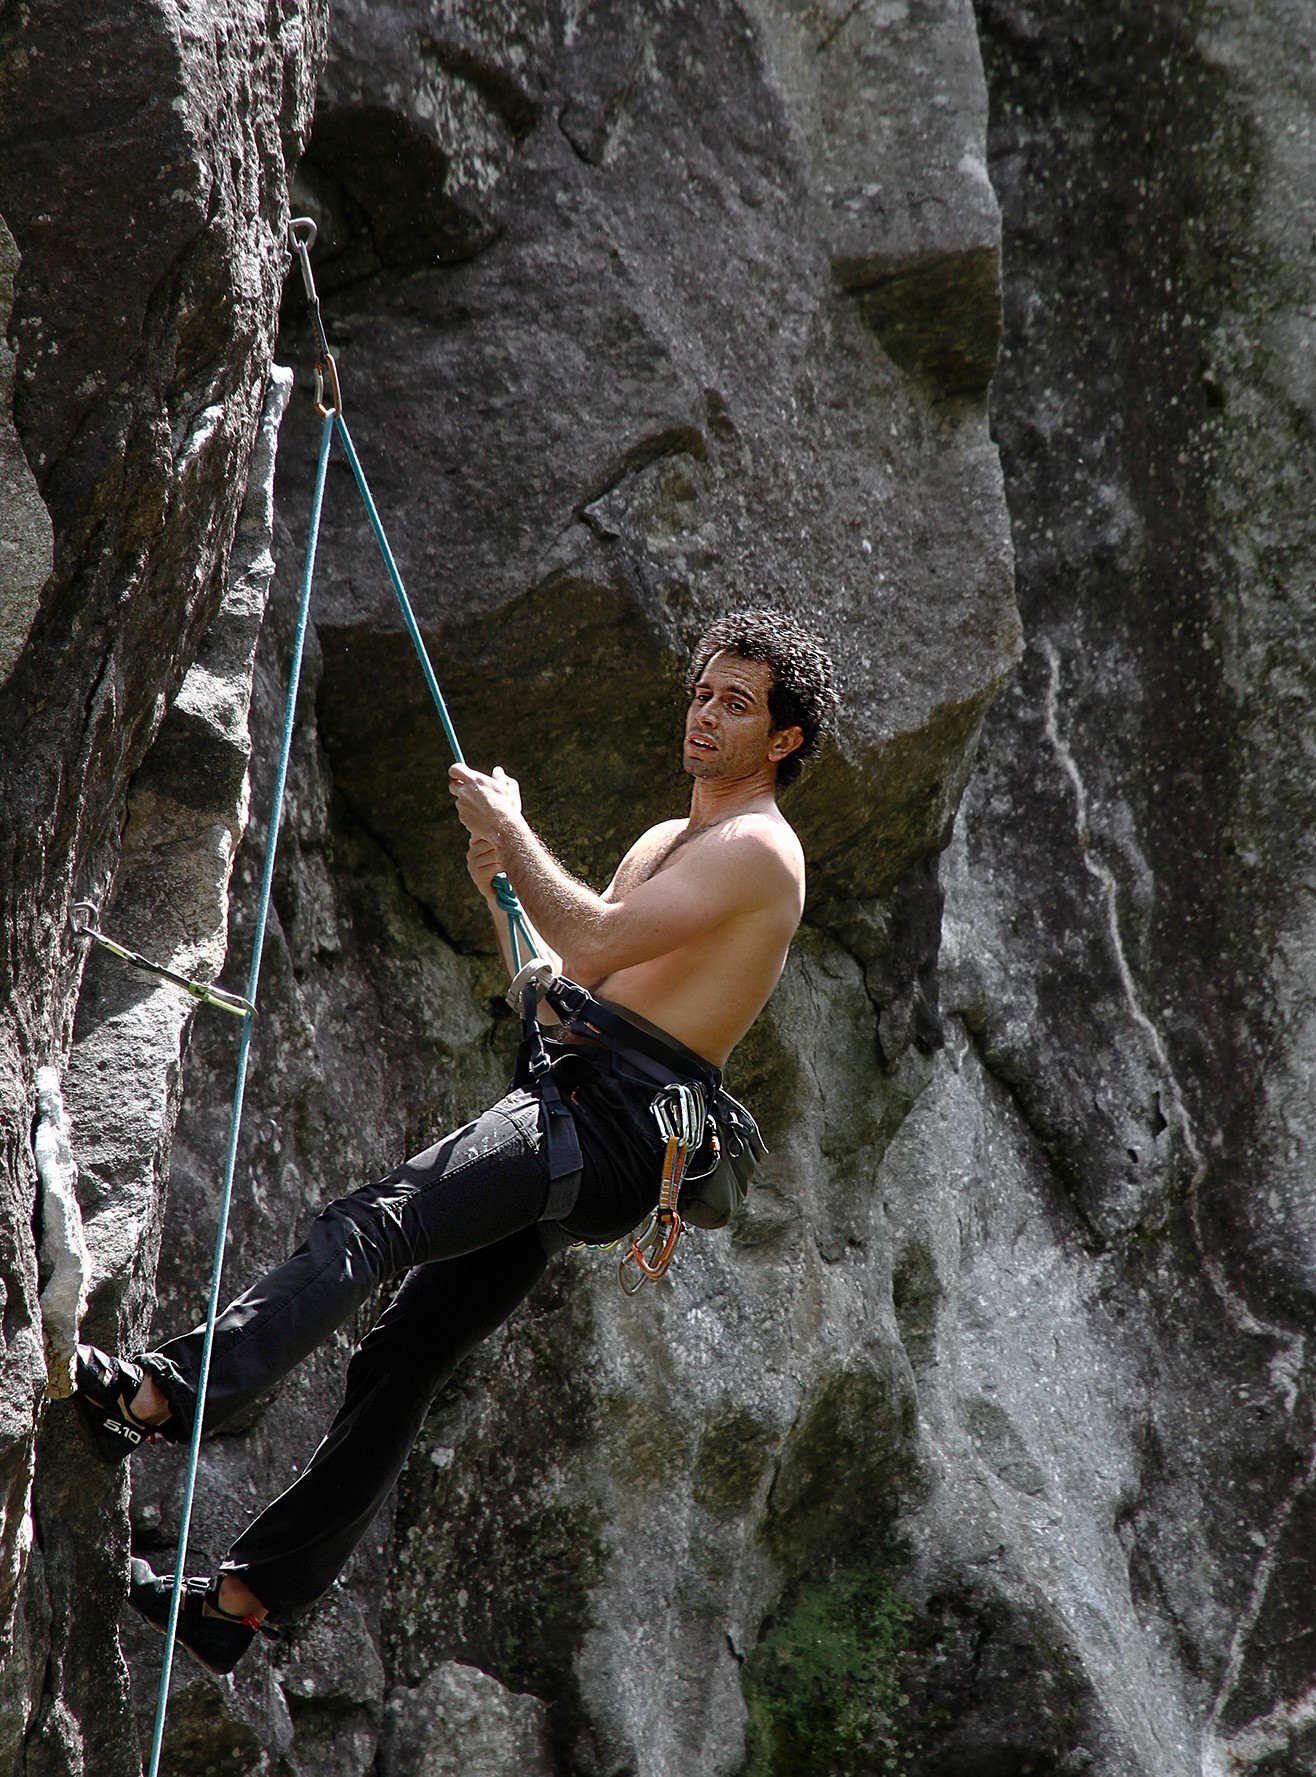 The climber's performance...